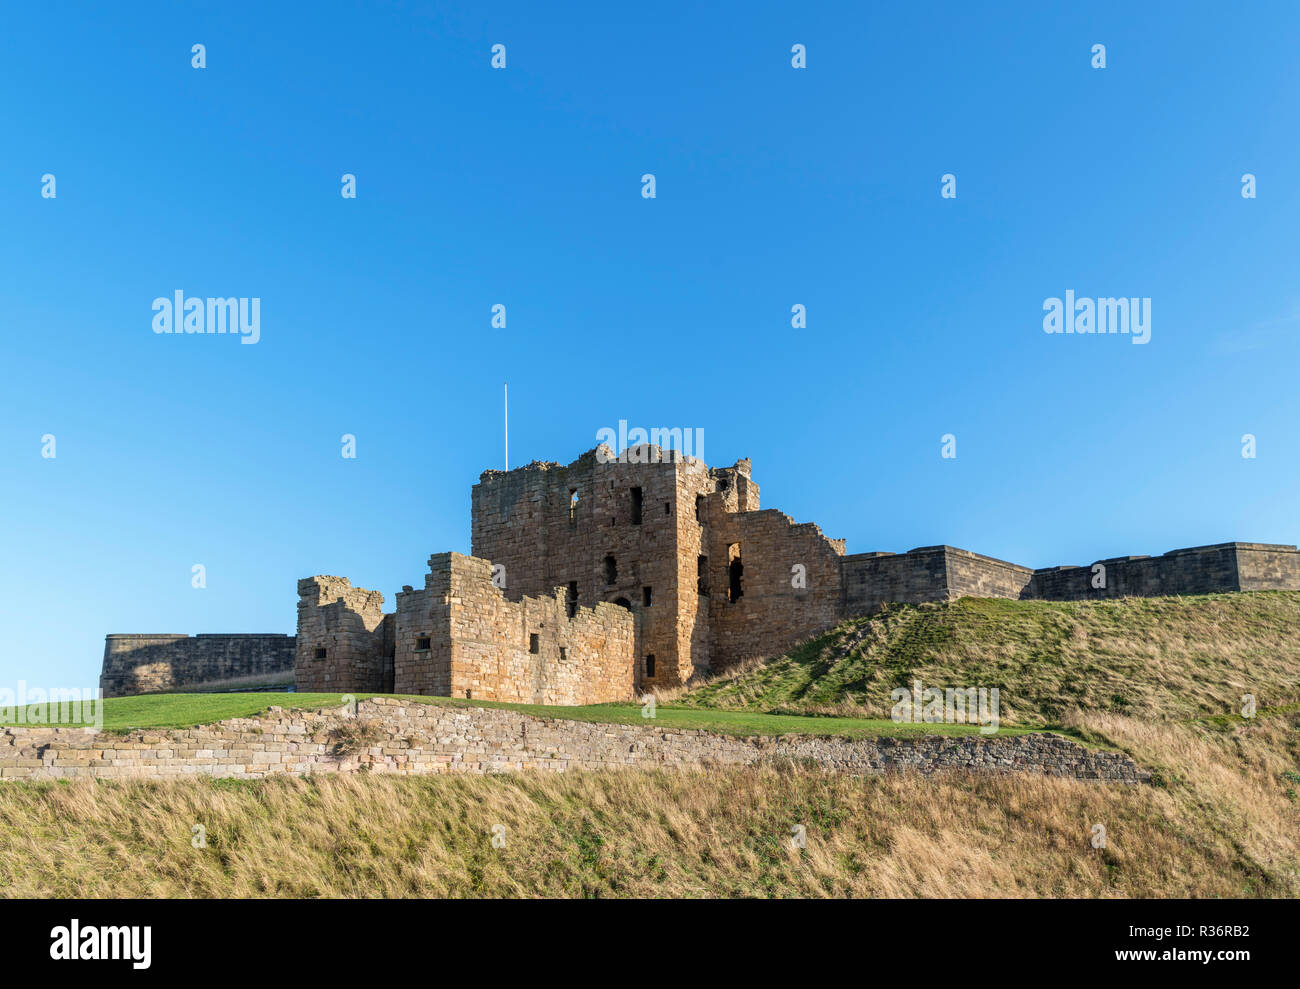 Tynemouth Castle, Tynemouth Castle et Prieuré, Tynemouth, Tyne et Wear, Angleterre, Royaume-Uni Banque D'Images